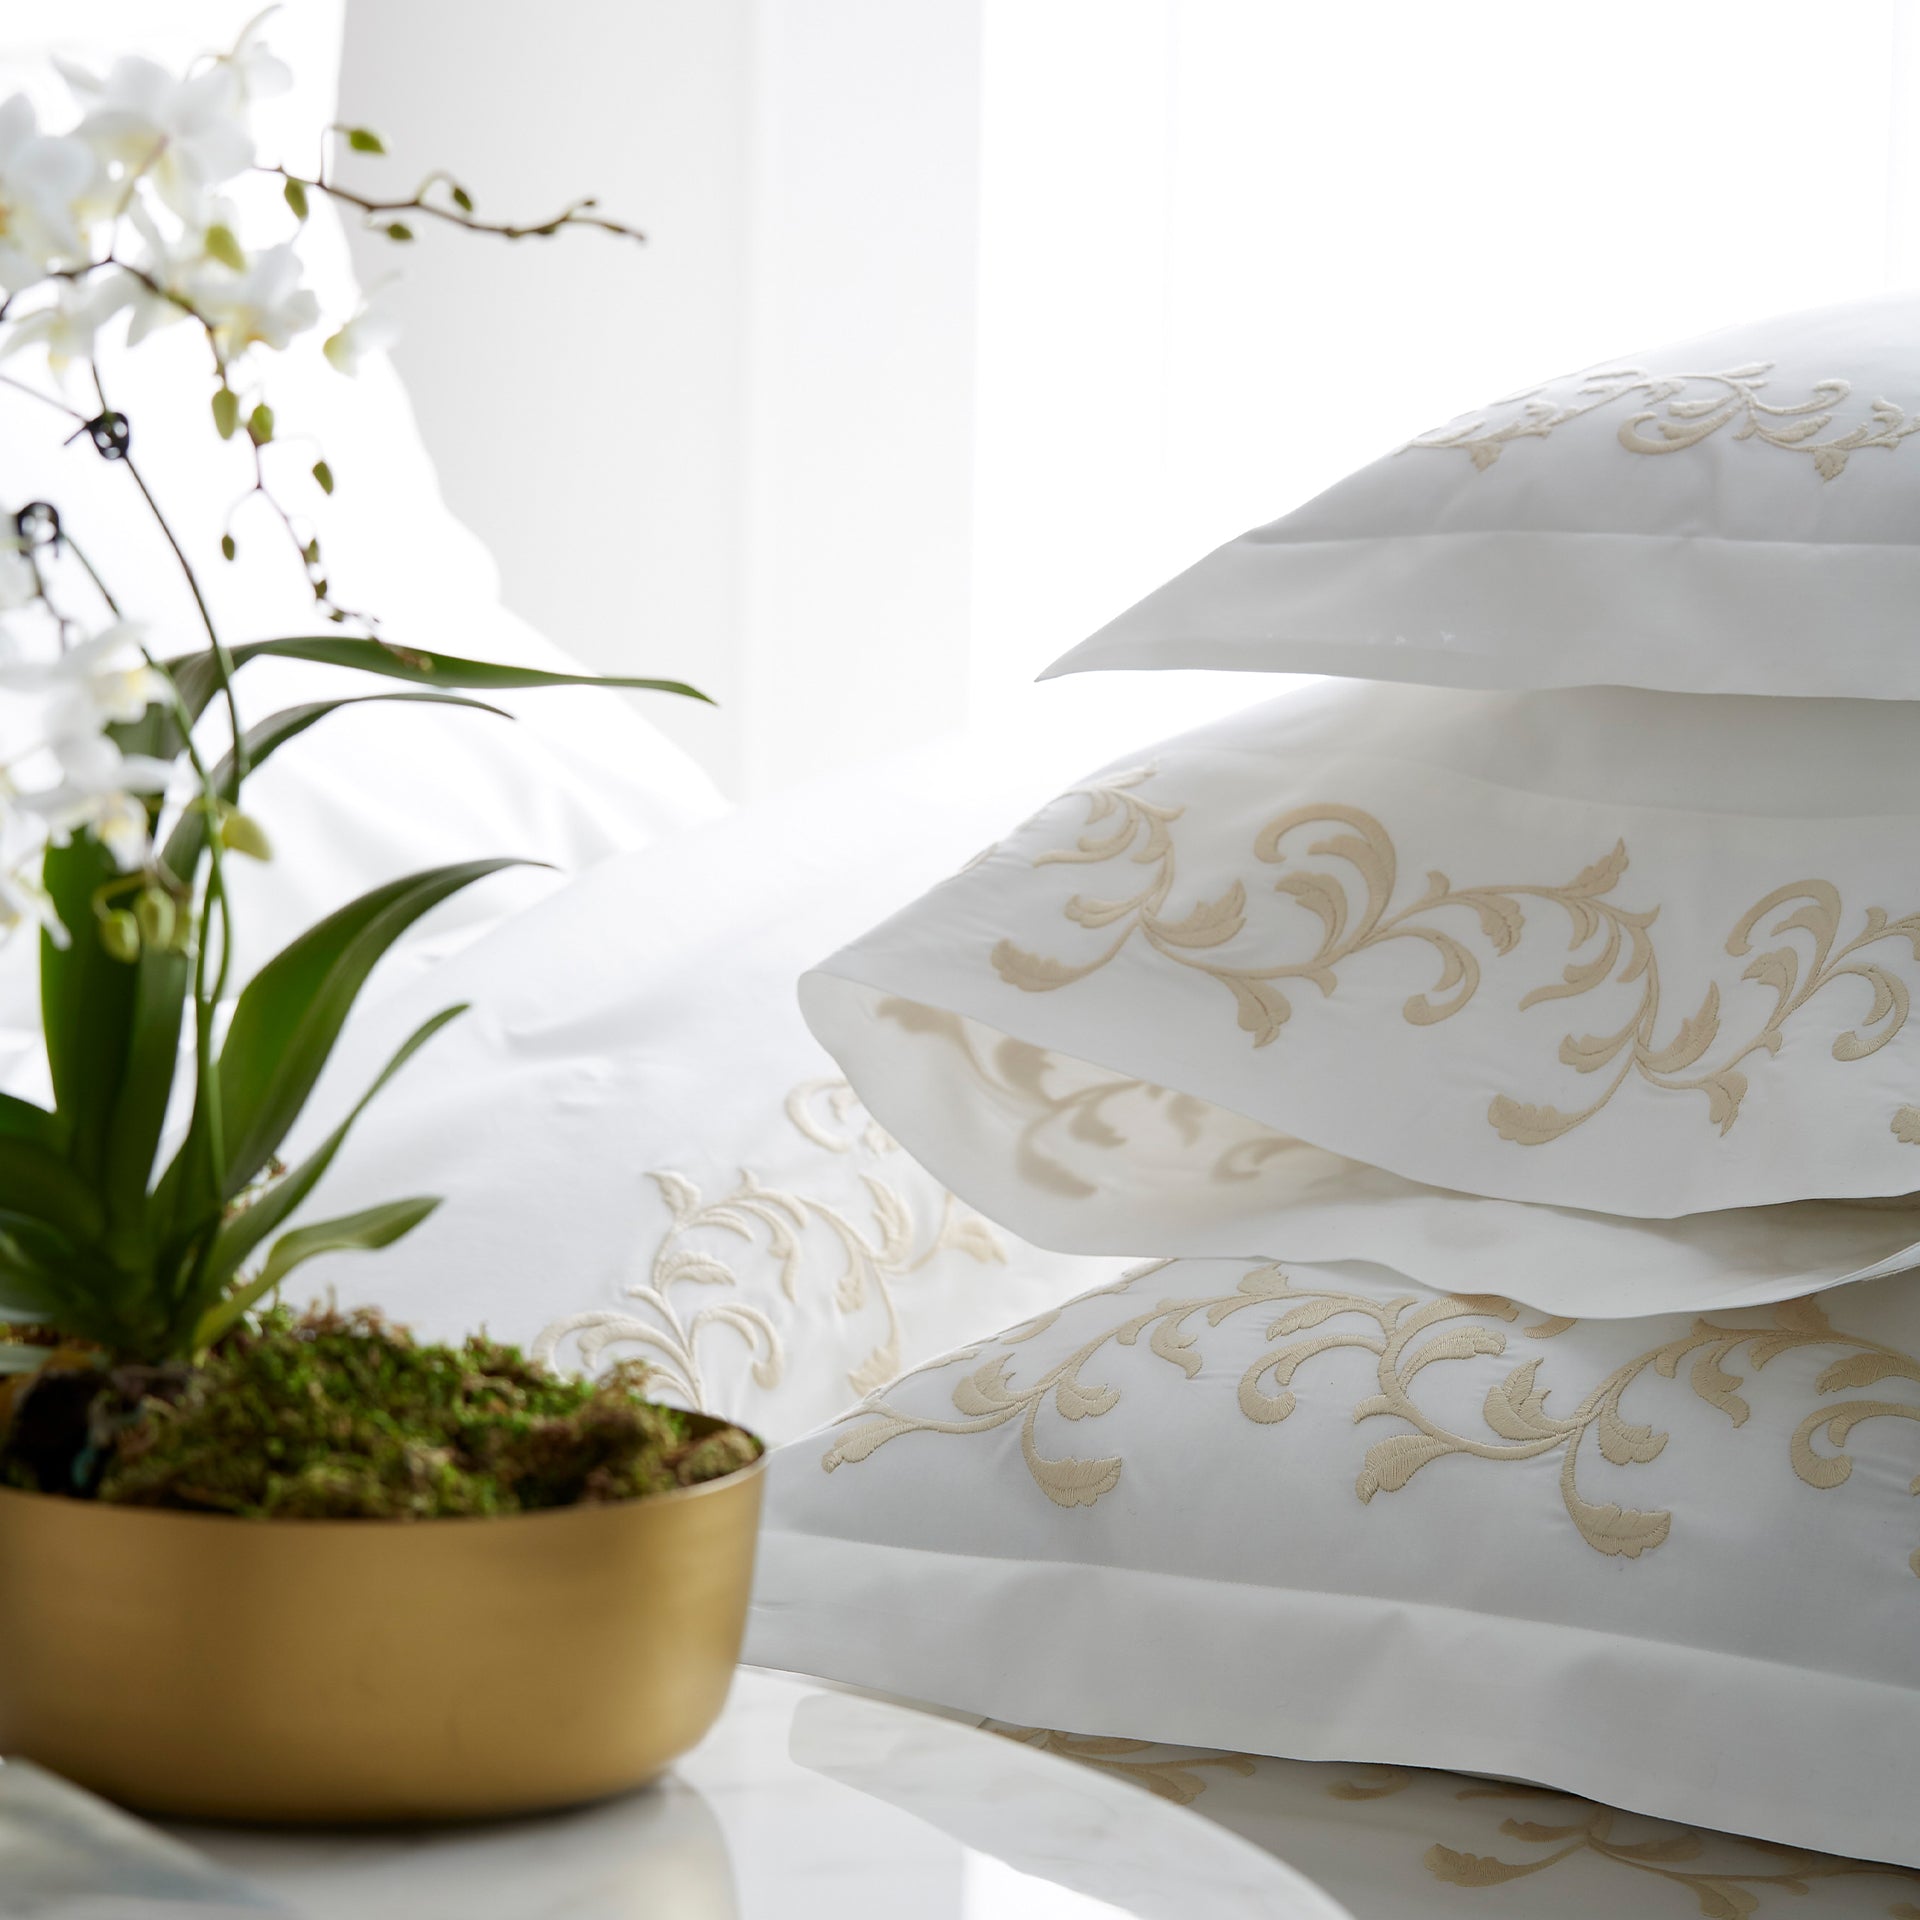 san remo pillowcase showing detail of scroll embroidery detail and hemstitch in the color cornsilk &amp; ivory, 